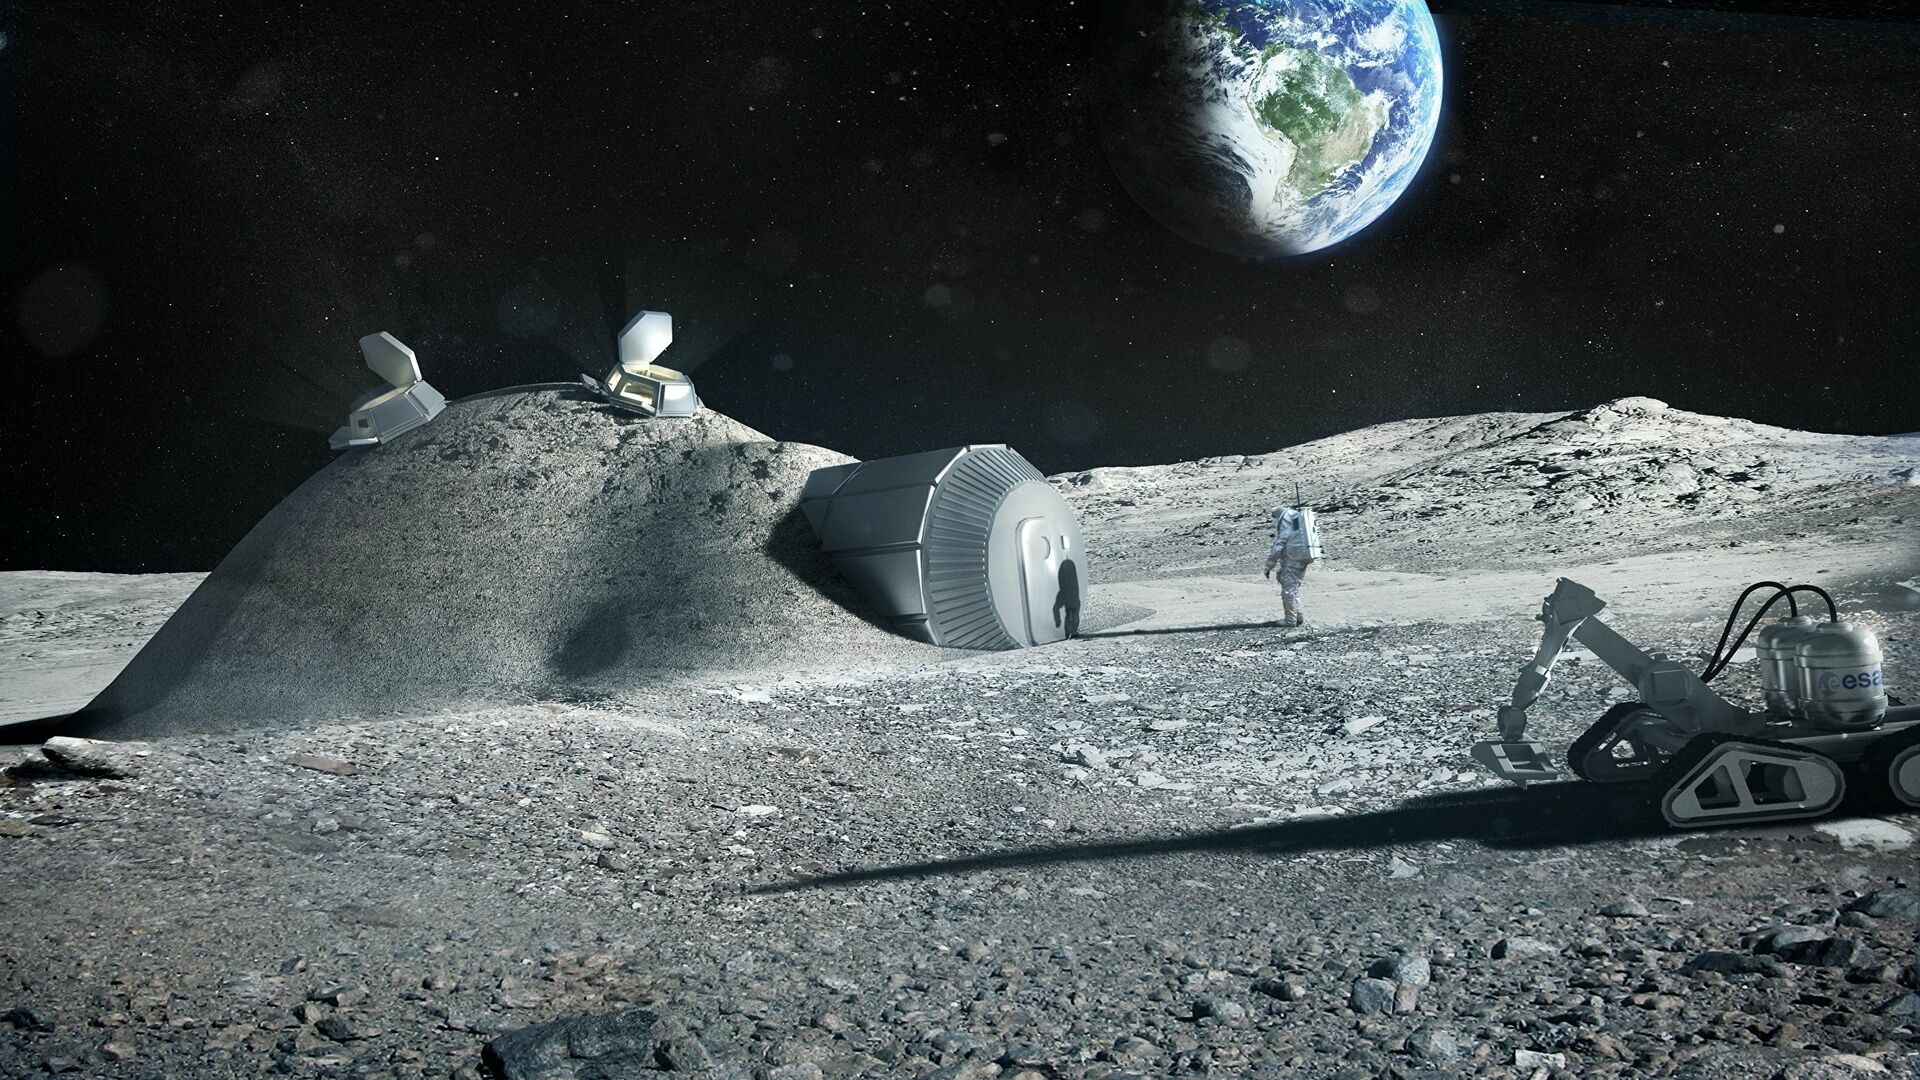 In pursuit of helium-3: what the Americans want to mine on the moon and why without Russia